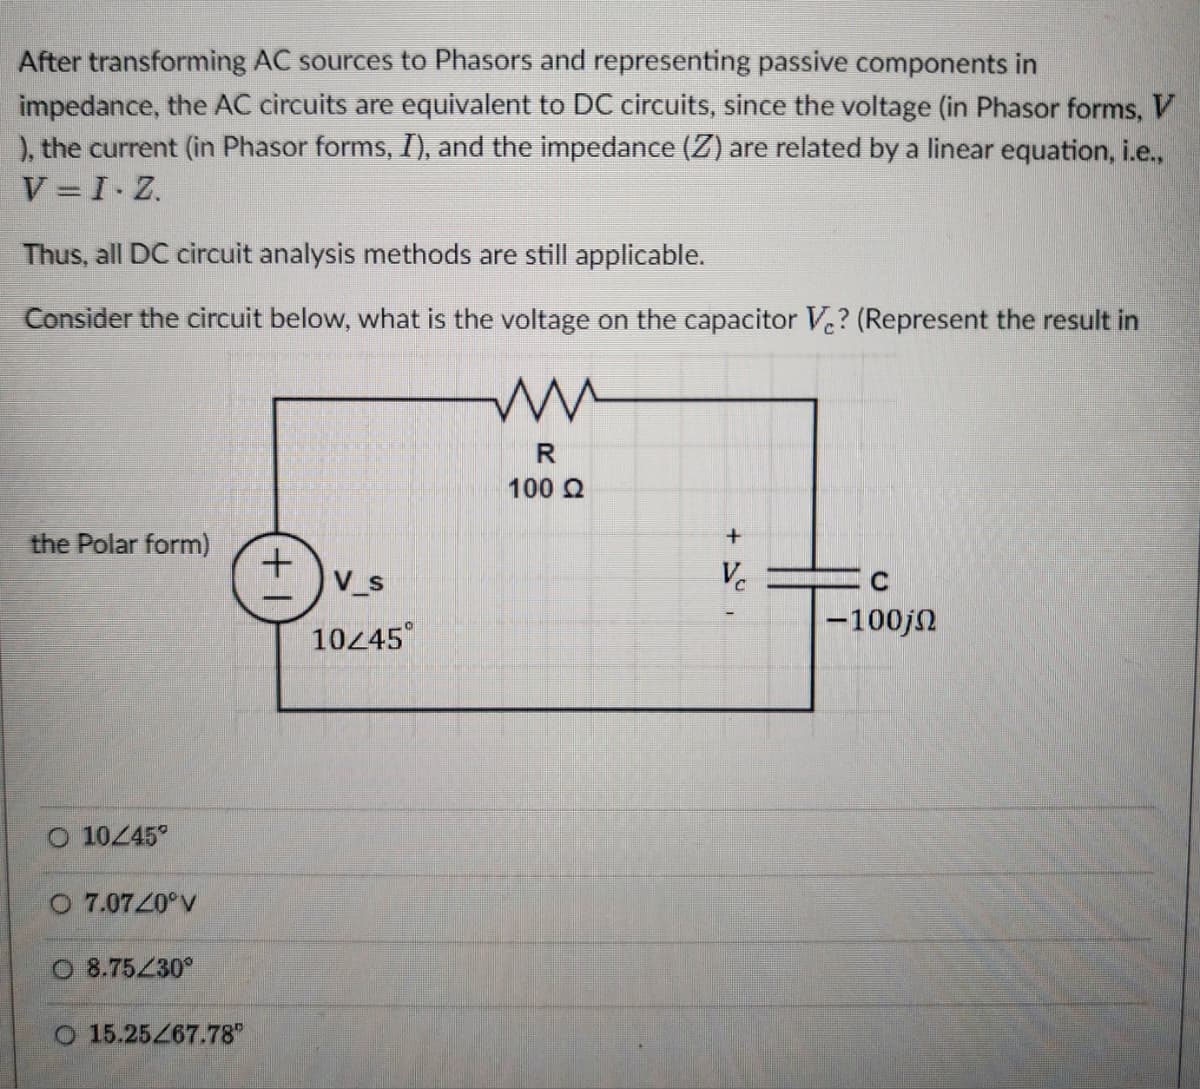 After transforming AC sources to Phasors and representing passive components in
impedance, the AC circuits are equivalent to DC circuits, since the voltage (in Phasor forms, V
), the current (in Phasor forms, I), and the impedance (Z) are related by a linear equation, i.e.,
V=I-Z
Thus, all DC circuit analysis methods are still applicable.
Consider the circuit below, what is the voltage on the capacitor V¿? (Represent the result in
ww
the Polar form)
O 10/45°
O 7.07/0°V
O 8.75/30°
O 15.25/67.78"
+
V_s
10/45°
R
100 Ω
+
V
C
-100jn